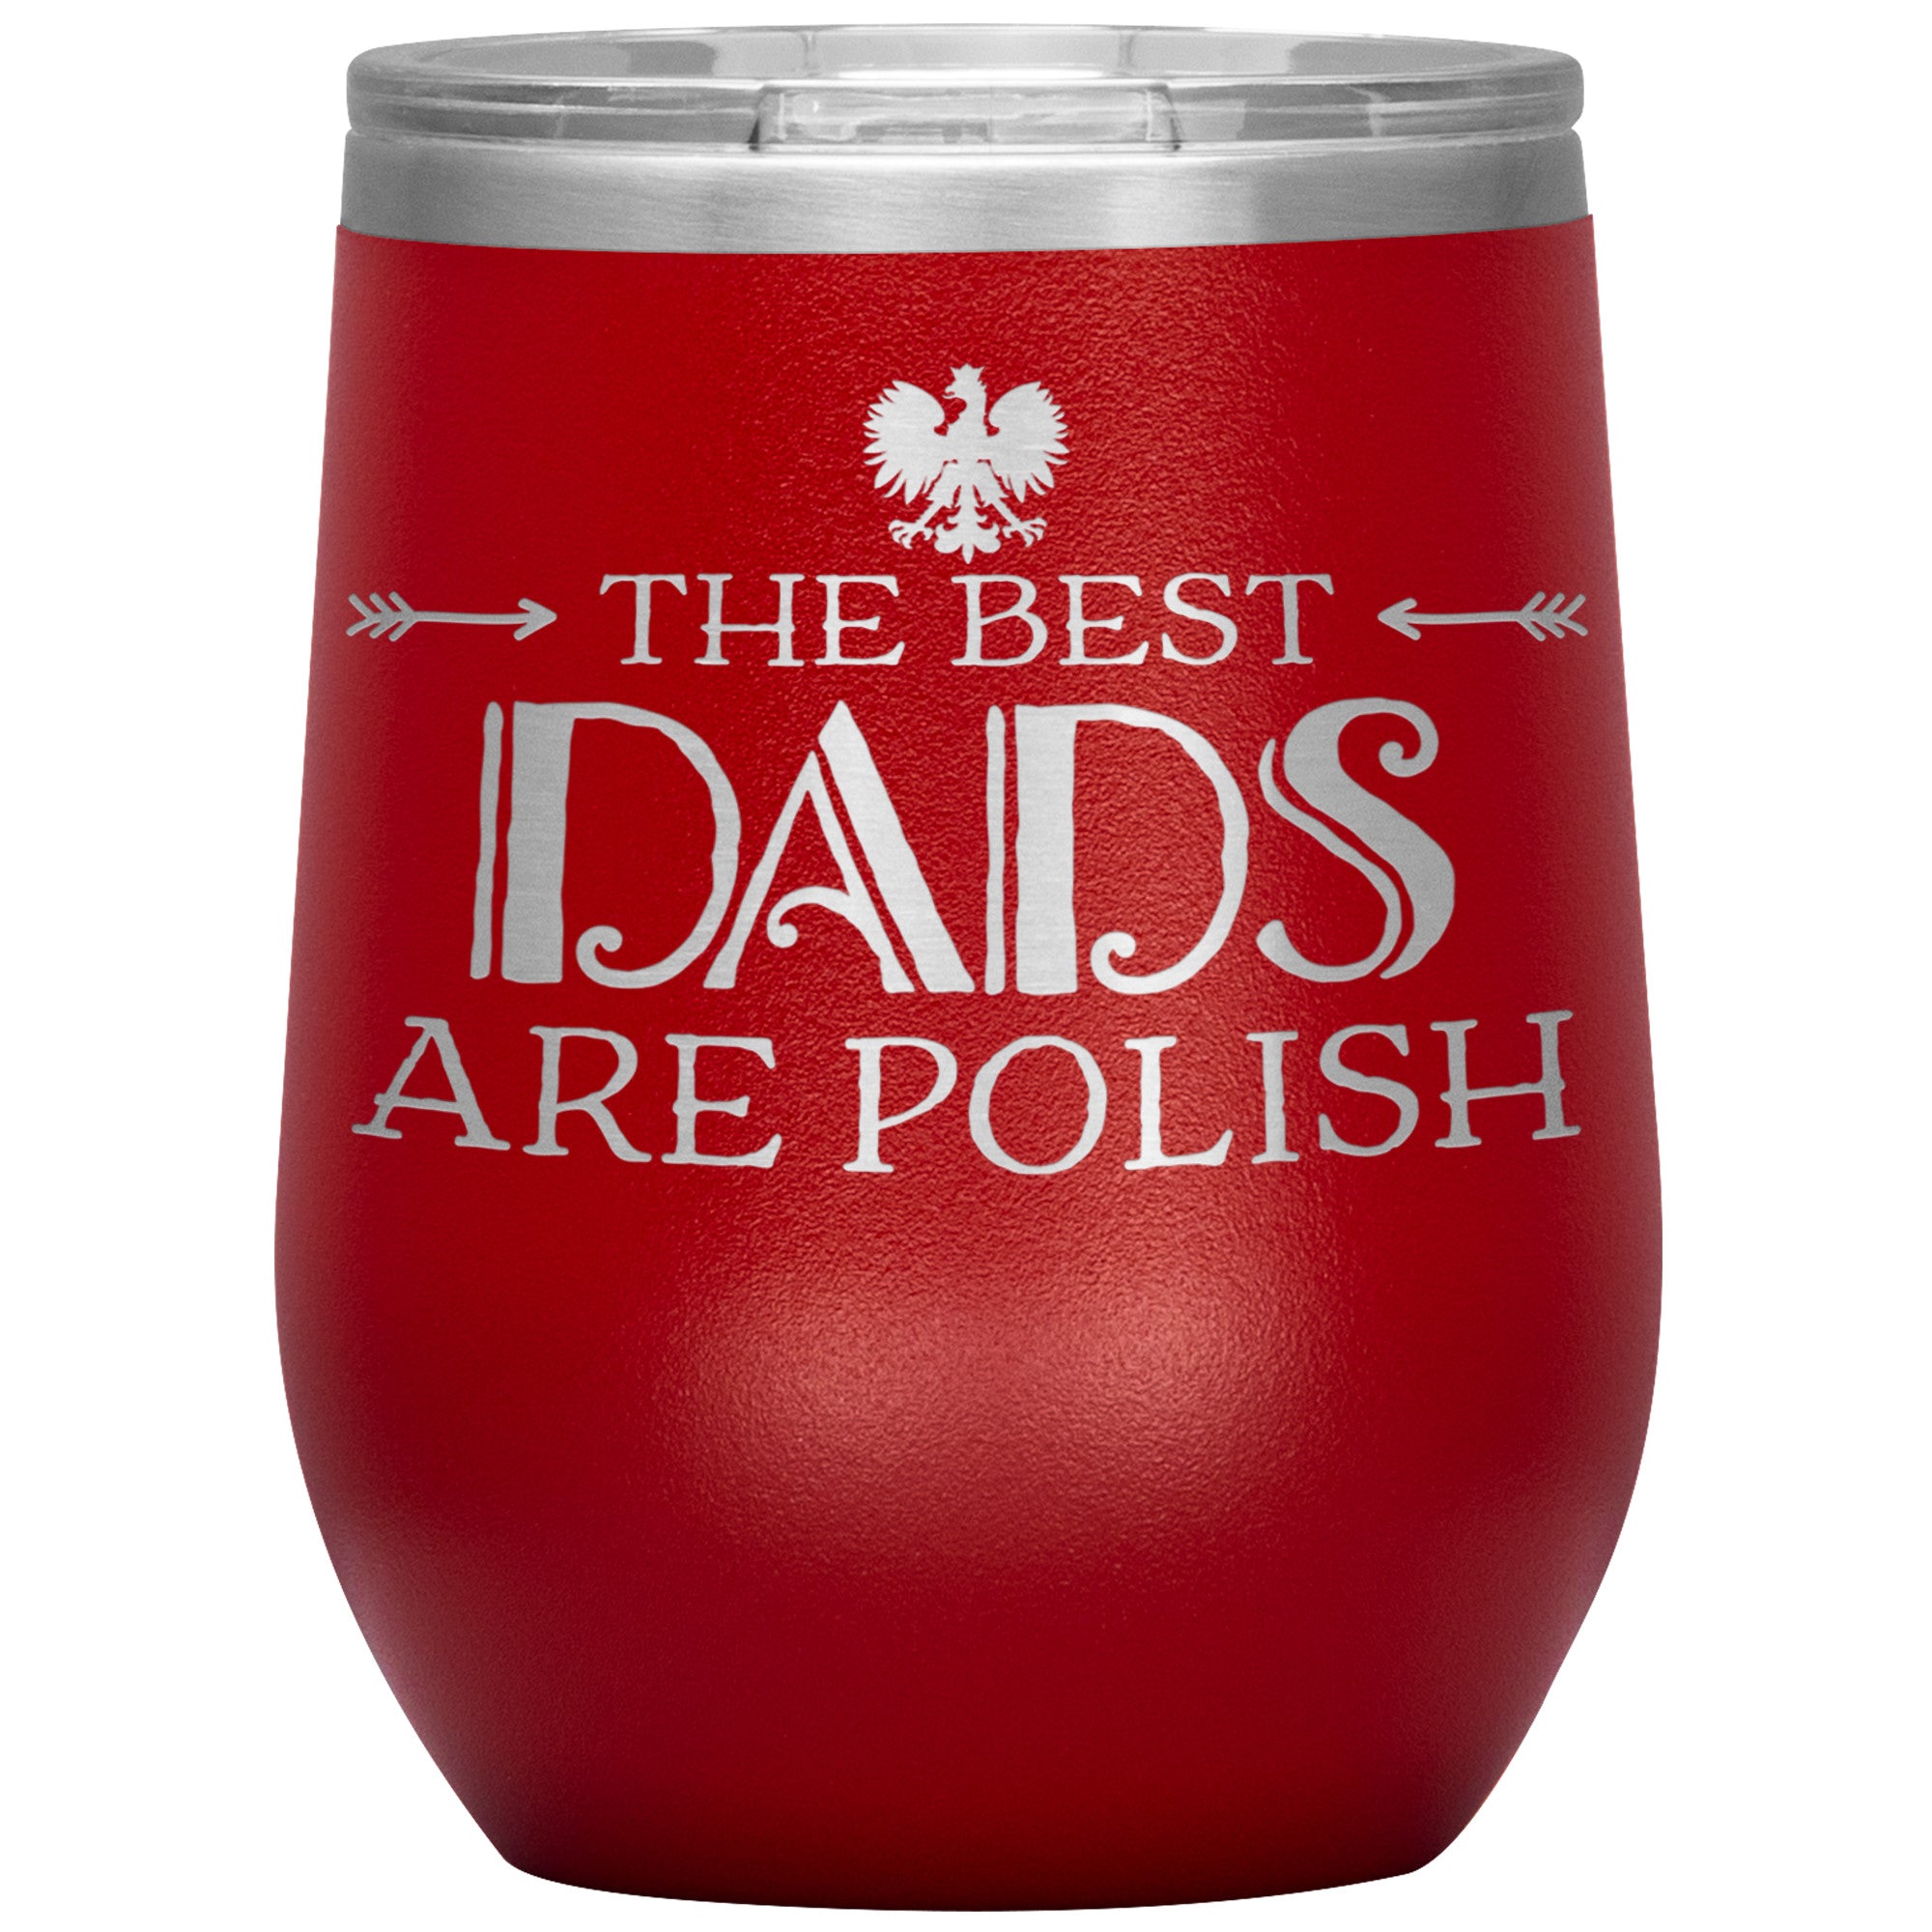 The Best Dads Are Polish Insulated Wine Tumbler Tumblers teelaunch Red  